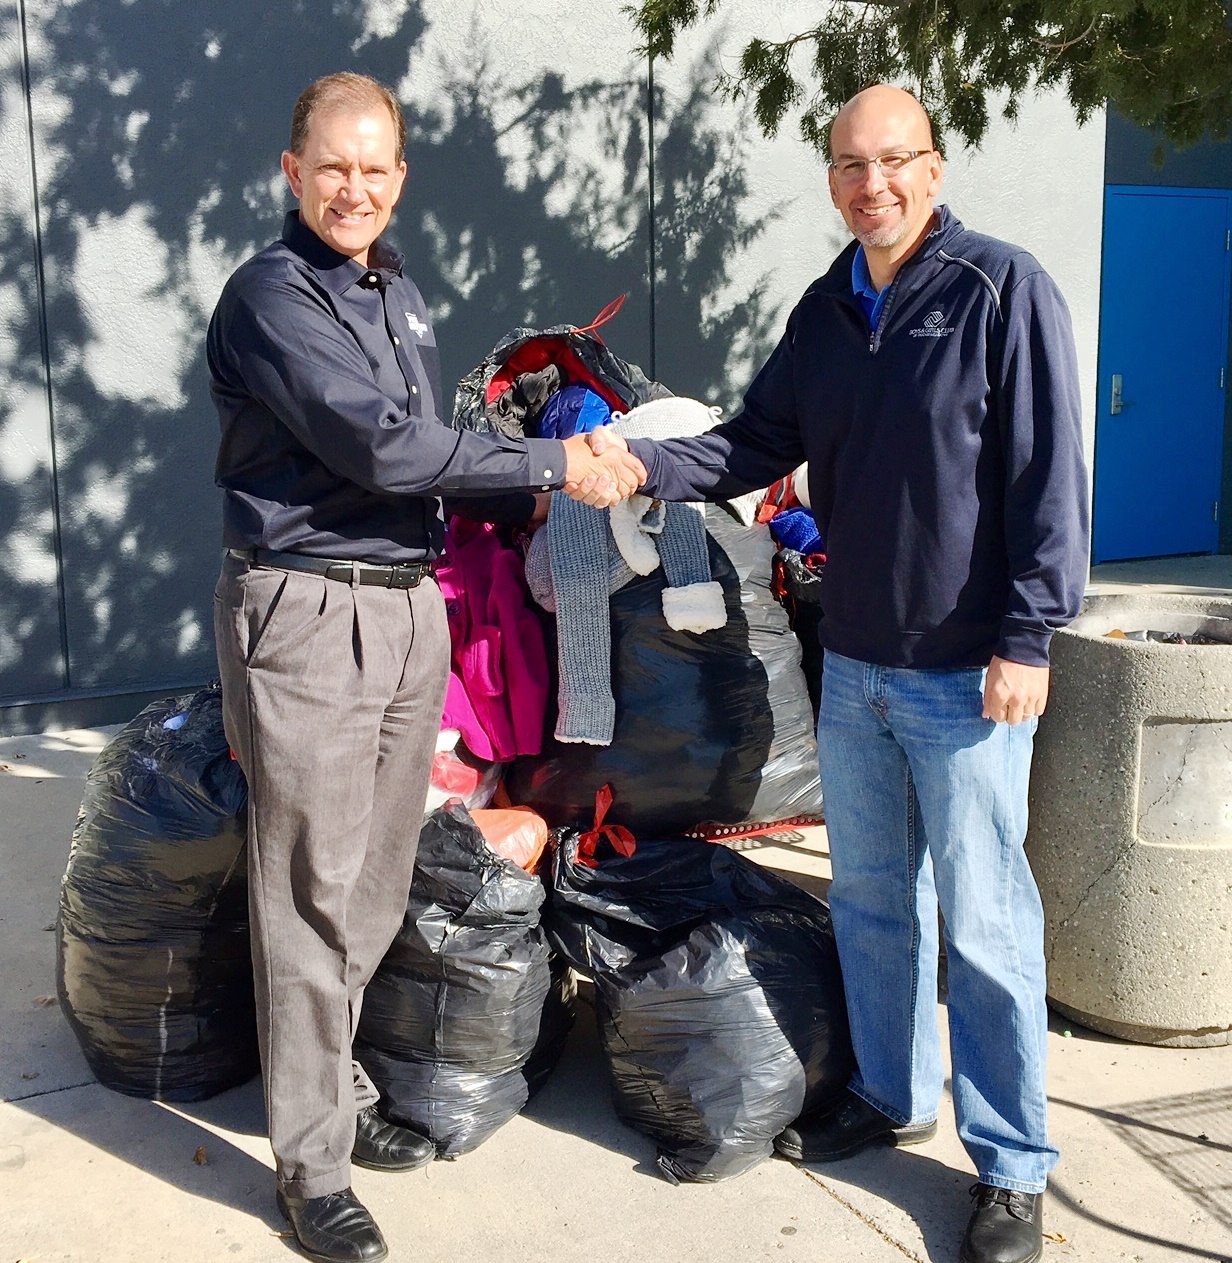 First Independent Bank customers, employees, and the general public, collected nearly 200 new coats for Northern Nevada children.